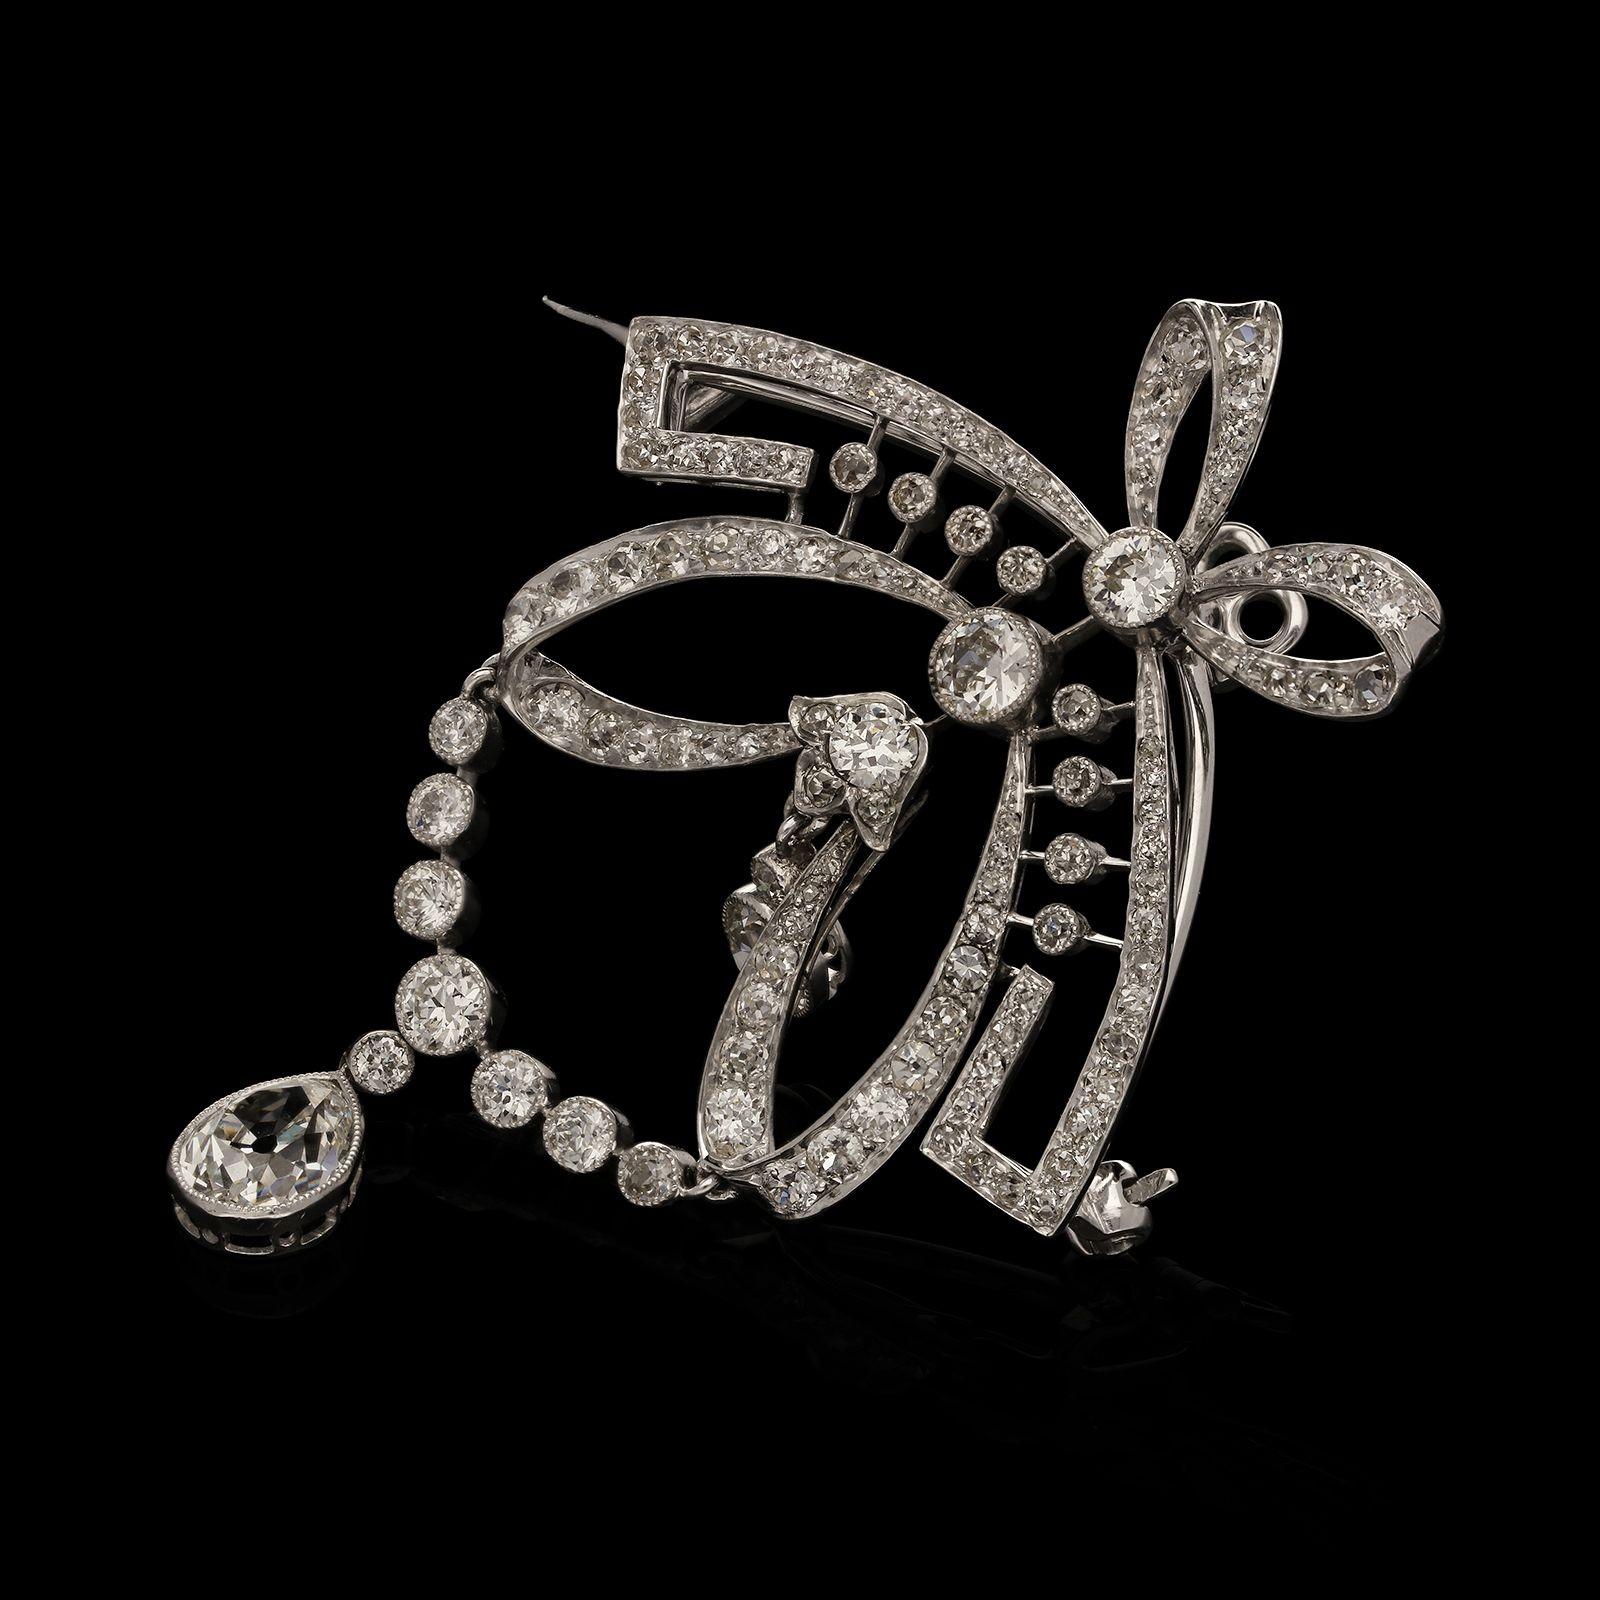 A beautiful Edwardian diamond and platinum brooch /pendant c.1910 of garland style design, the body of the pendant is circular in shape with inner swag motifs and surmounted by a stylised ribbon bow, it suspends a single pear shape old cut diamond